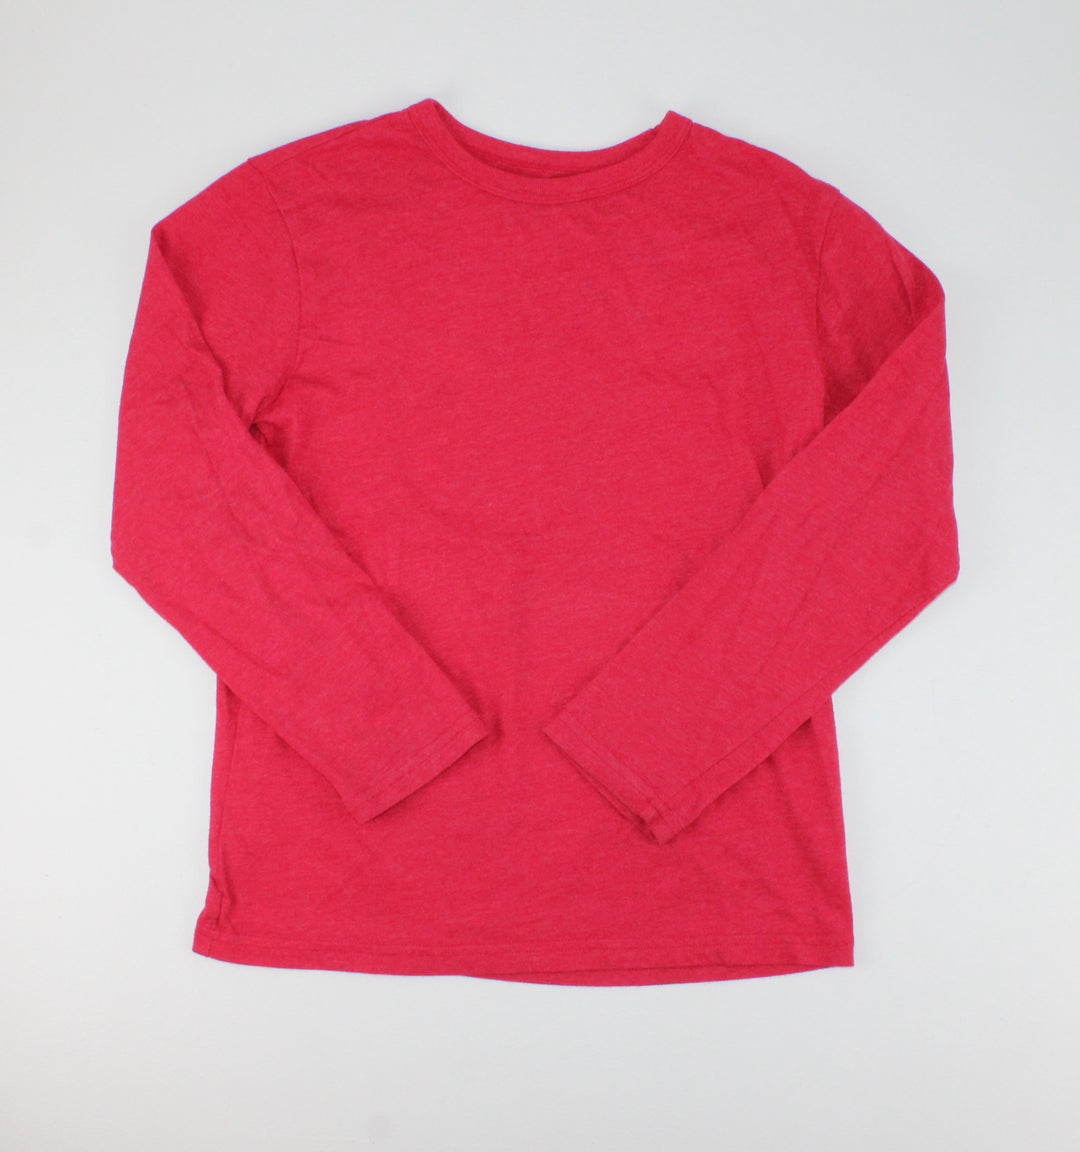 CHILDRENS PLACE RED LONG SLEEVE TOP 7-8Y EUC